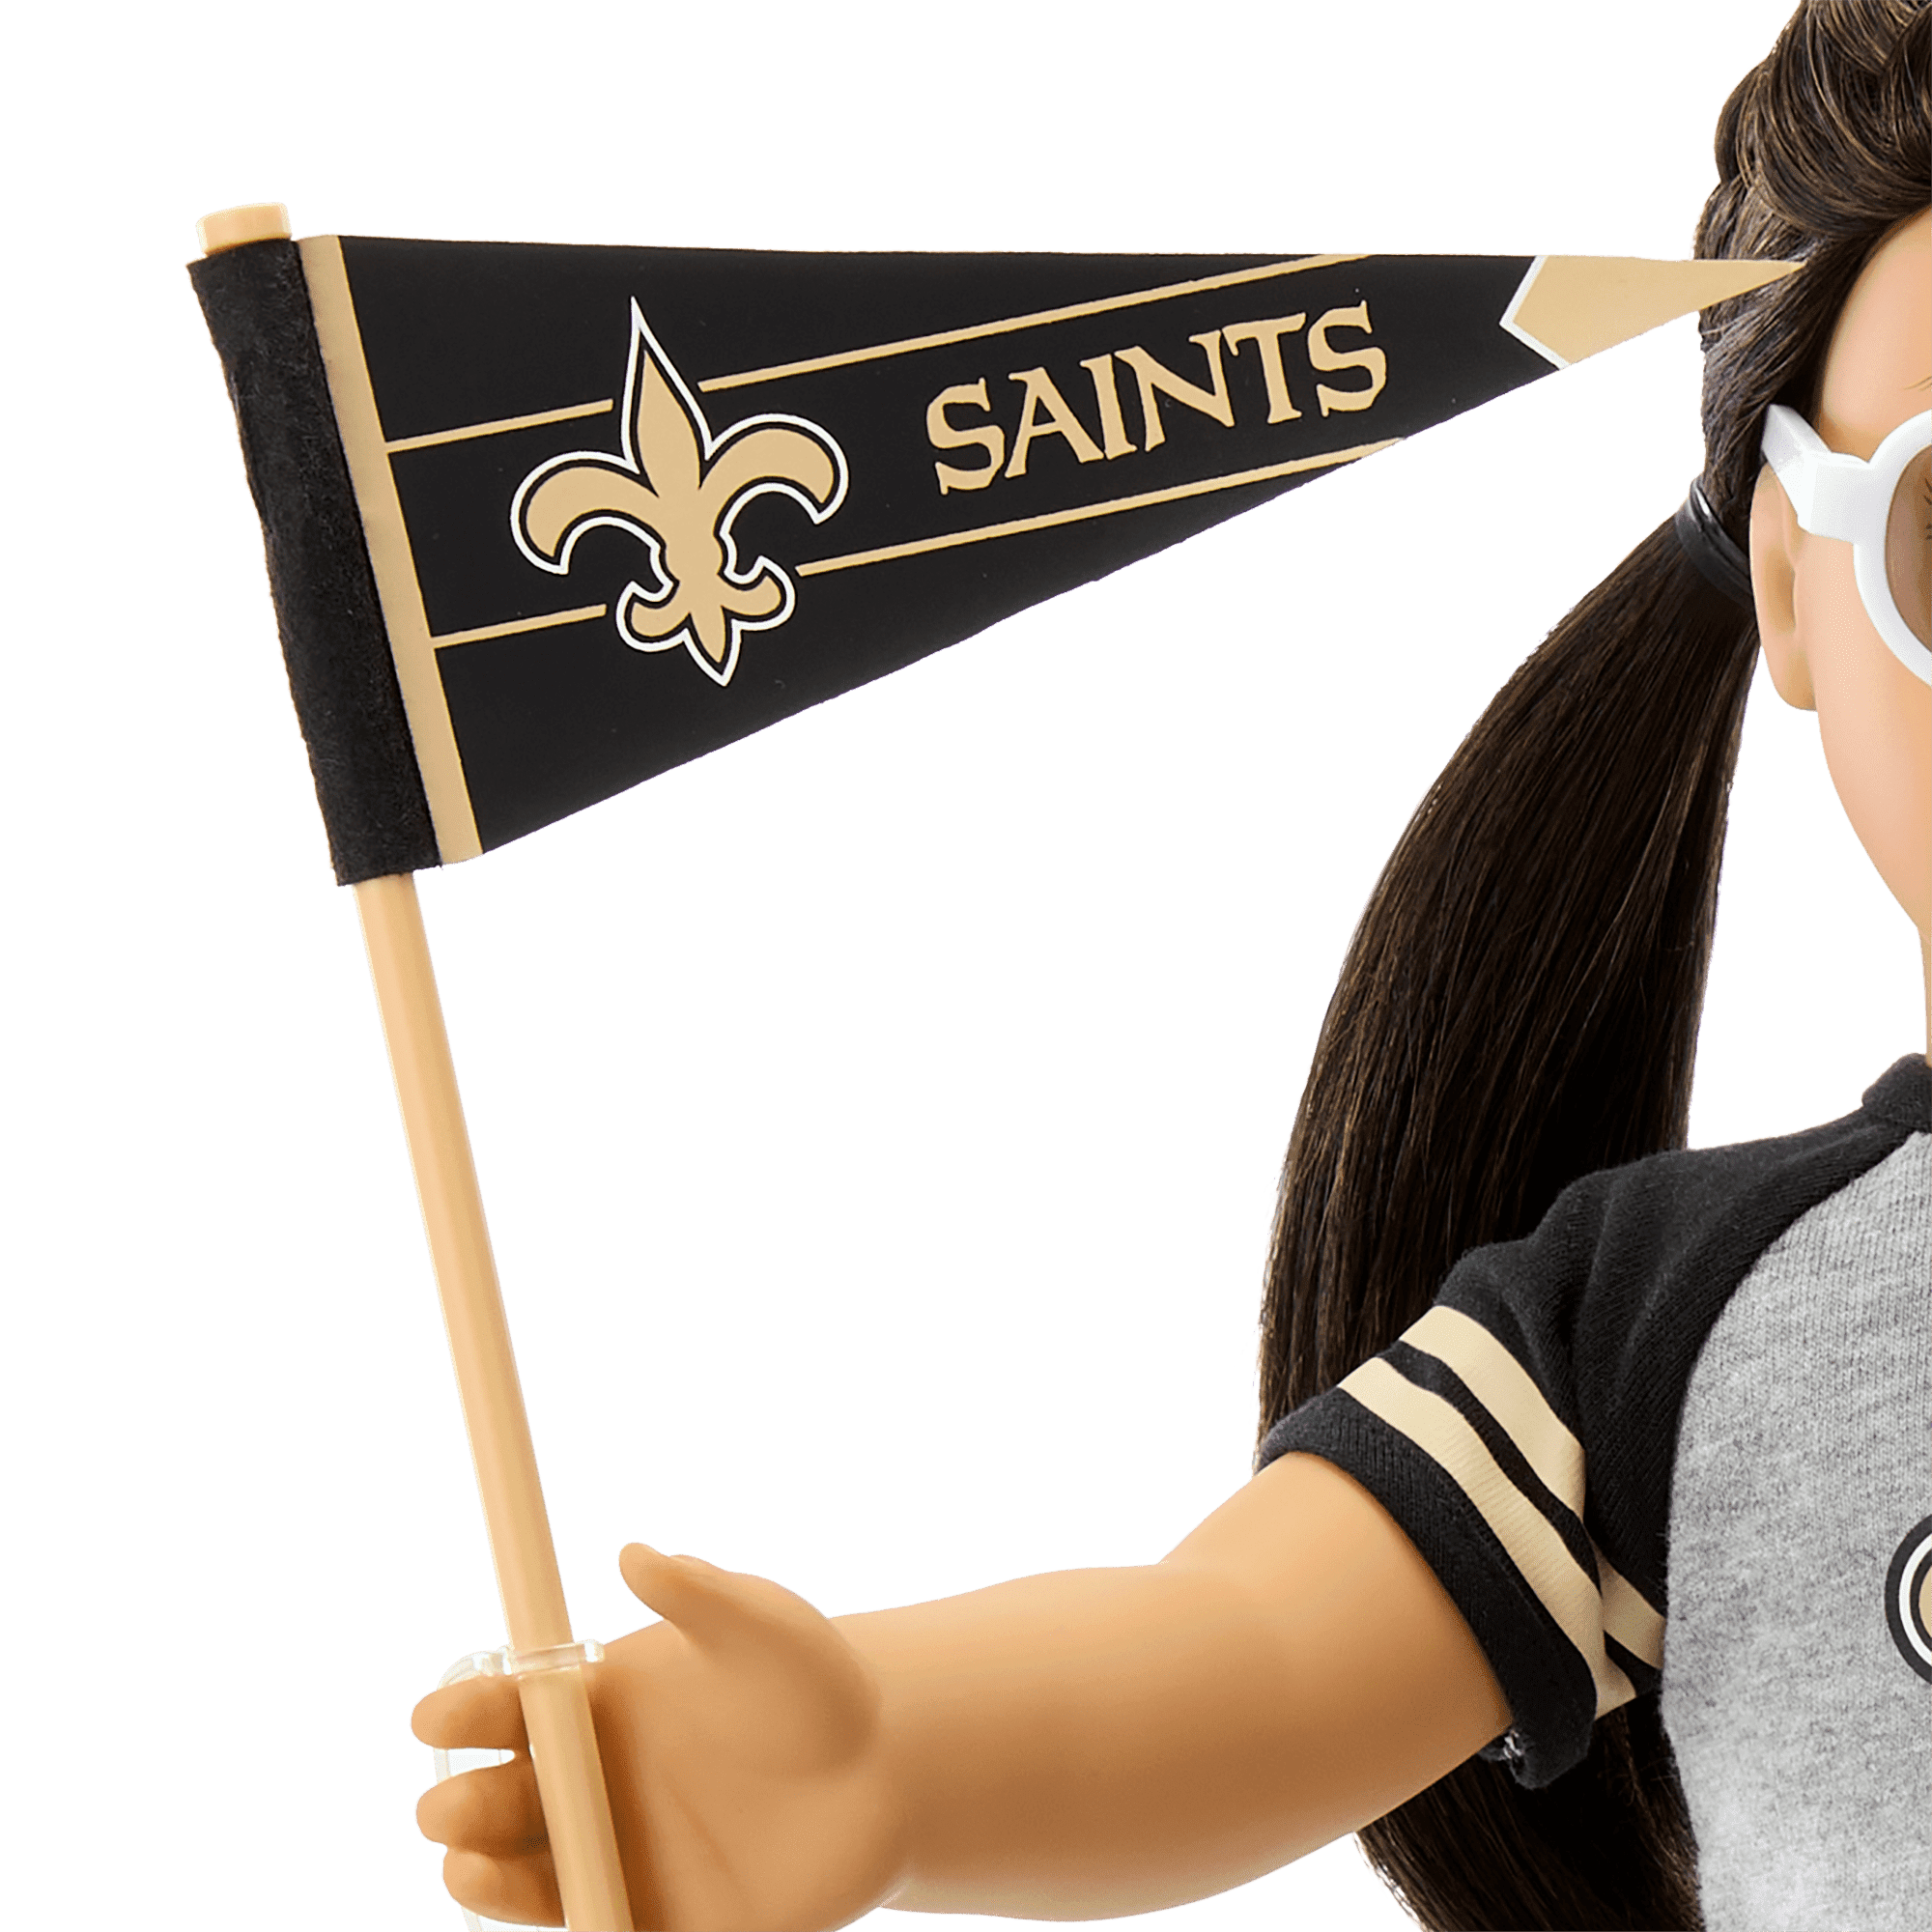 American Girl® x NFL New Orleans Saints Fan Outfit & Accessories for 18-inch Dolls